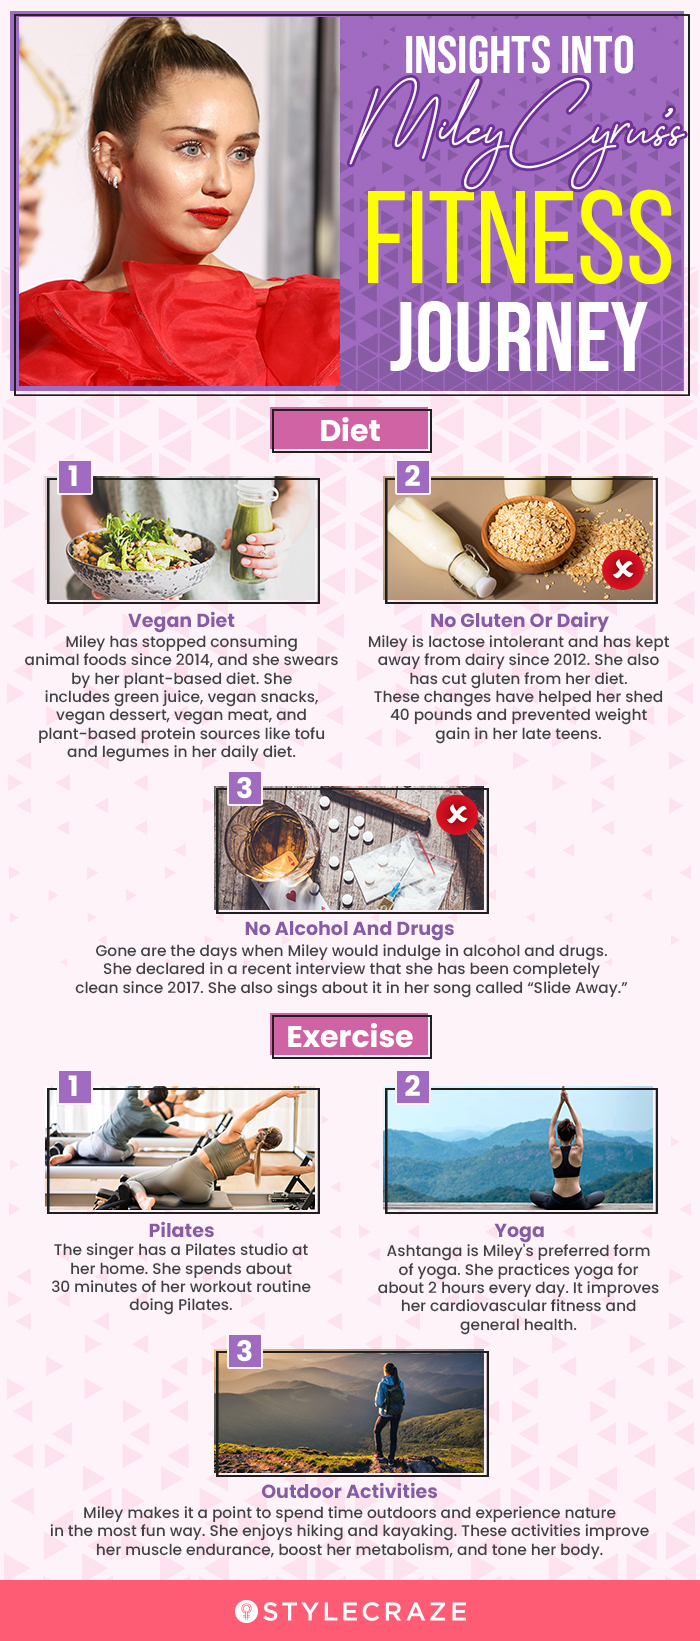 insights into miley cyrus’s fitness journey (infographic)